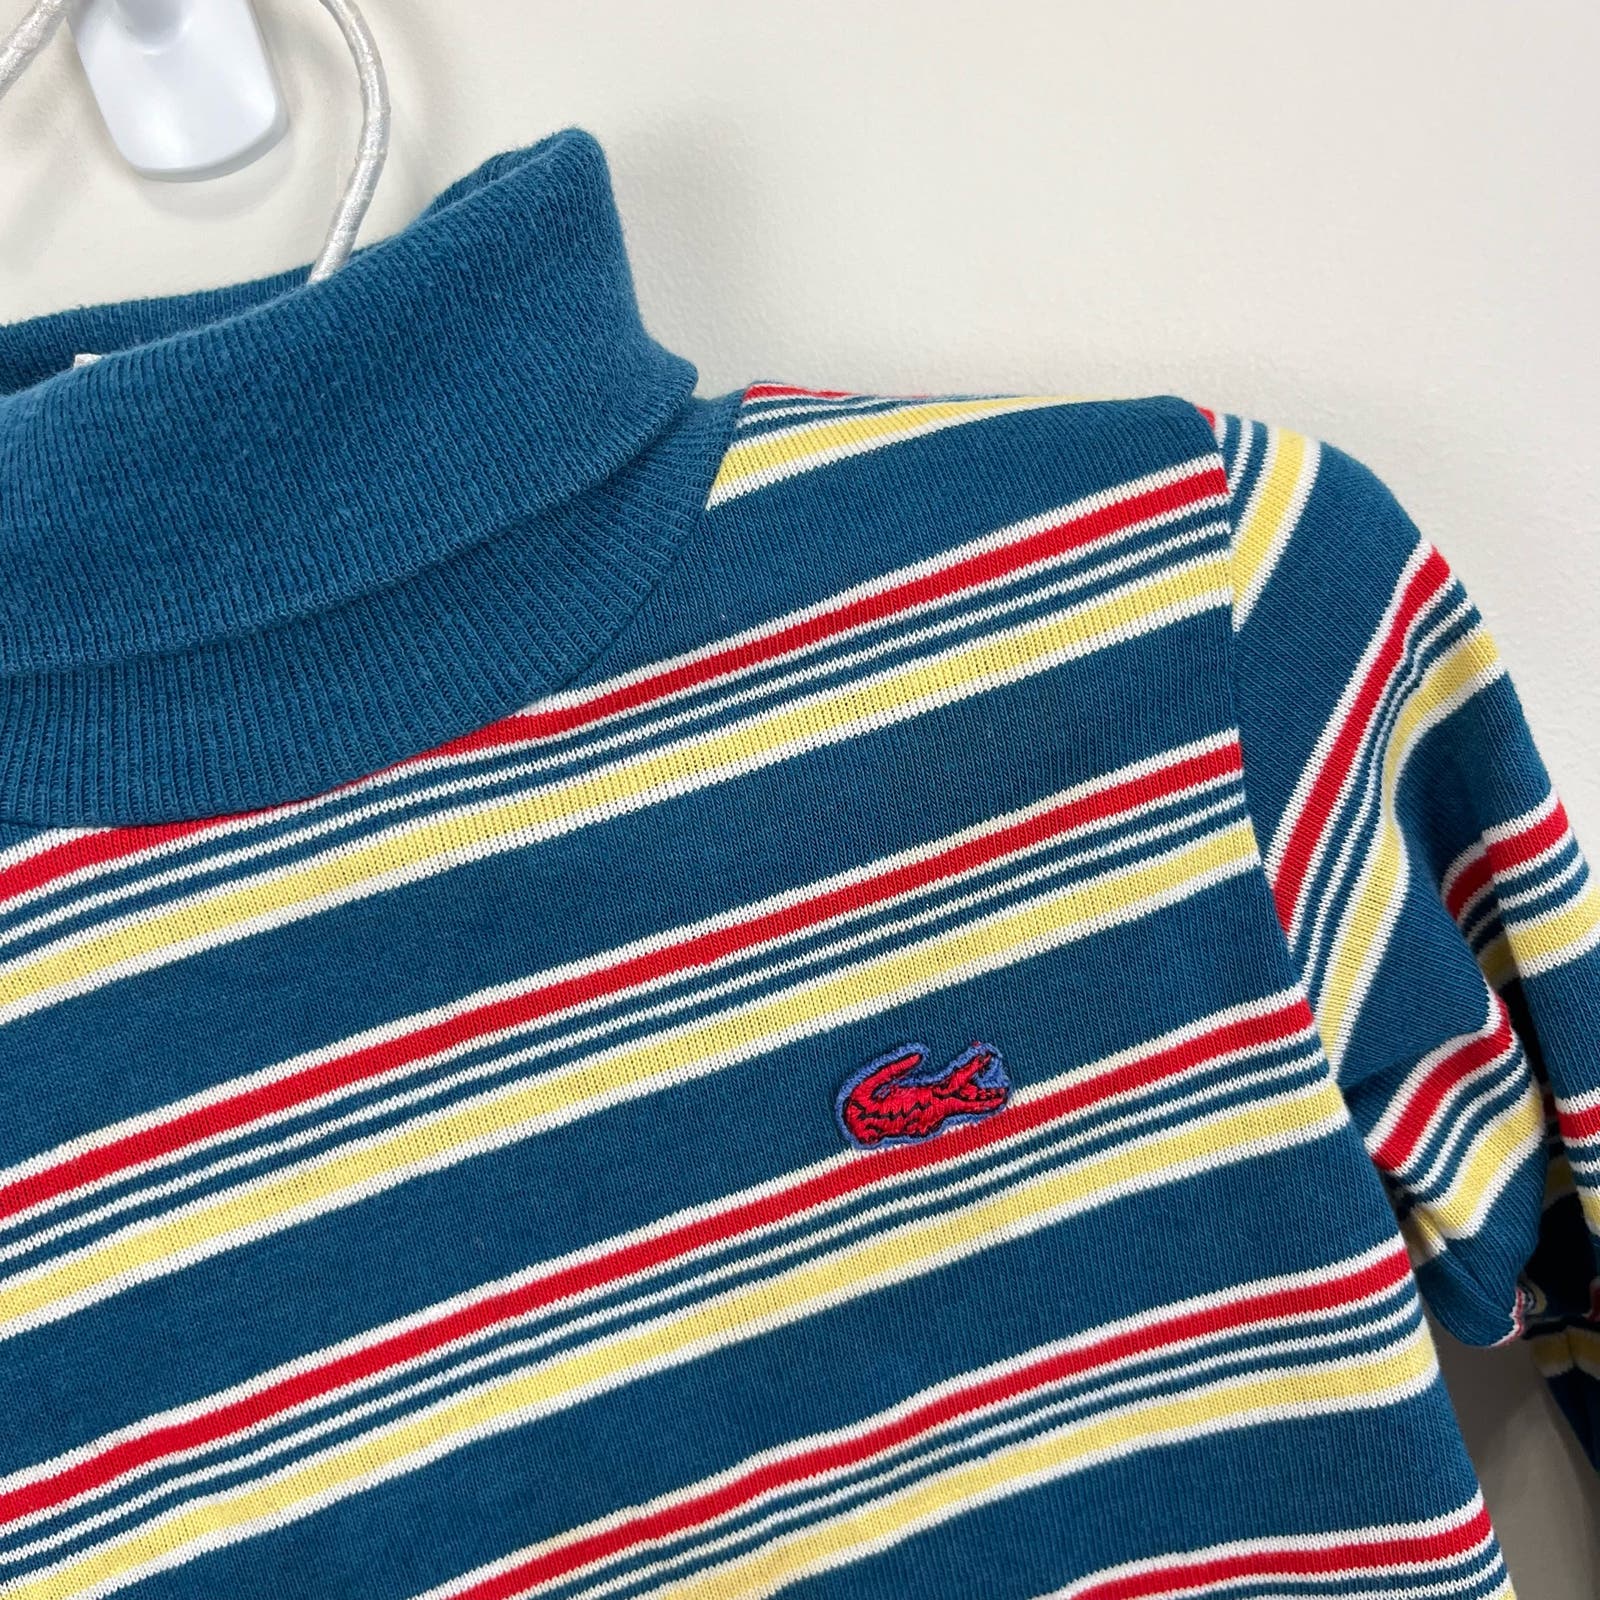 Vintage Lacoste Colorful Striped Long Sleeve Shirt 3T USA